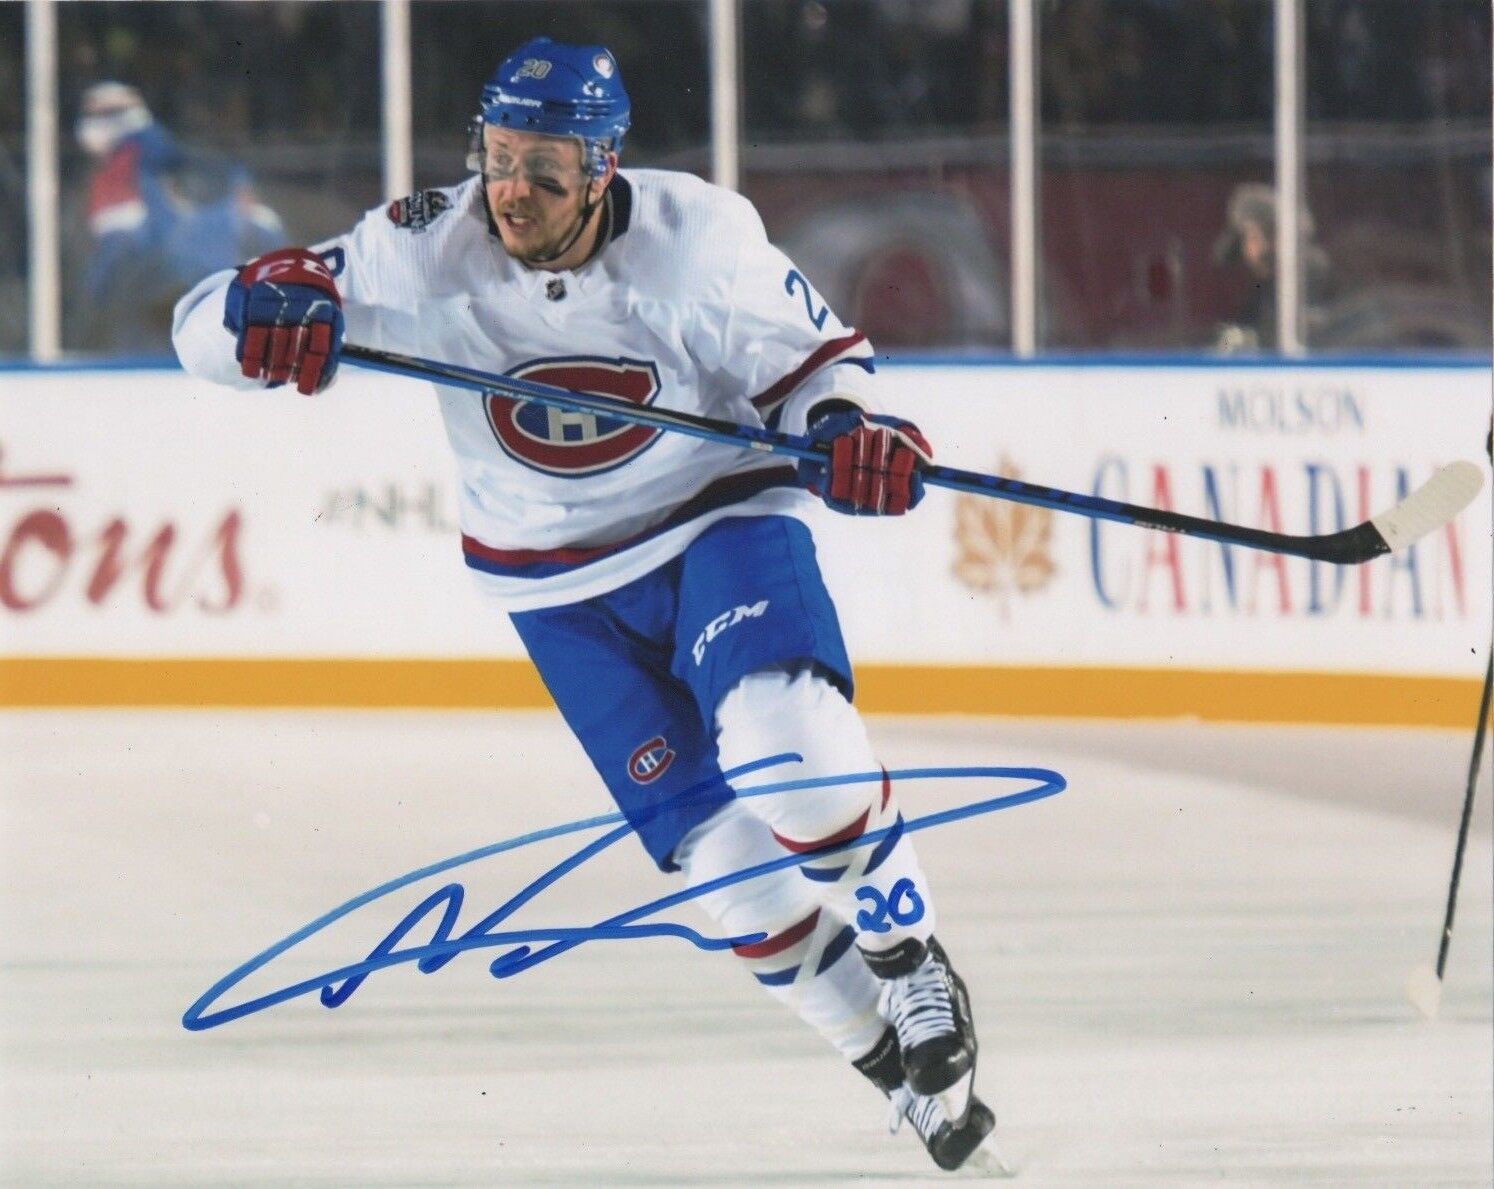 Montreal Canadiens Nicolas Deslauriers Signed Autographed 8x10 NHL Photo Poster painting COA #4